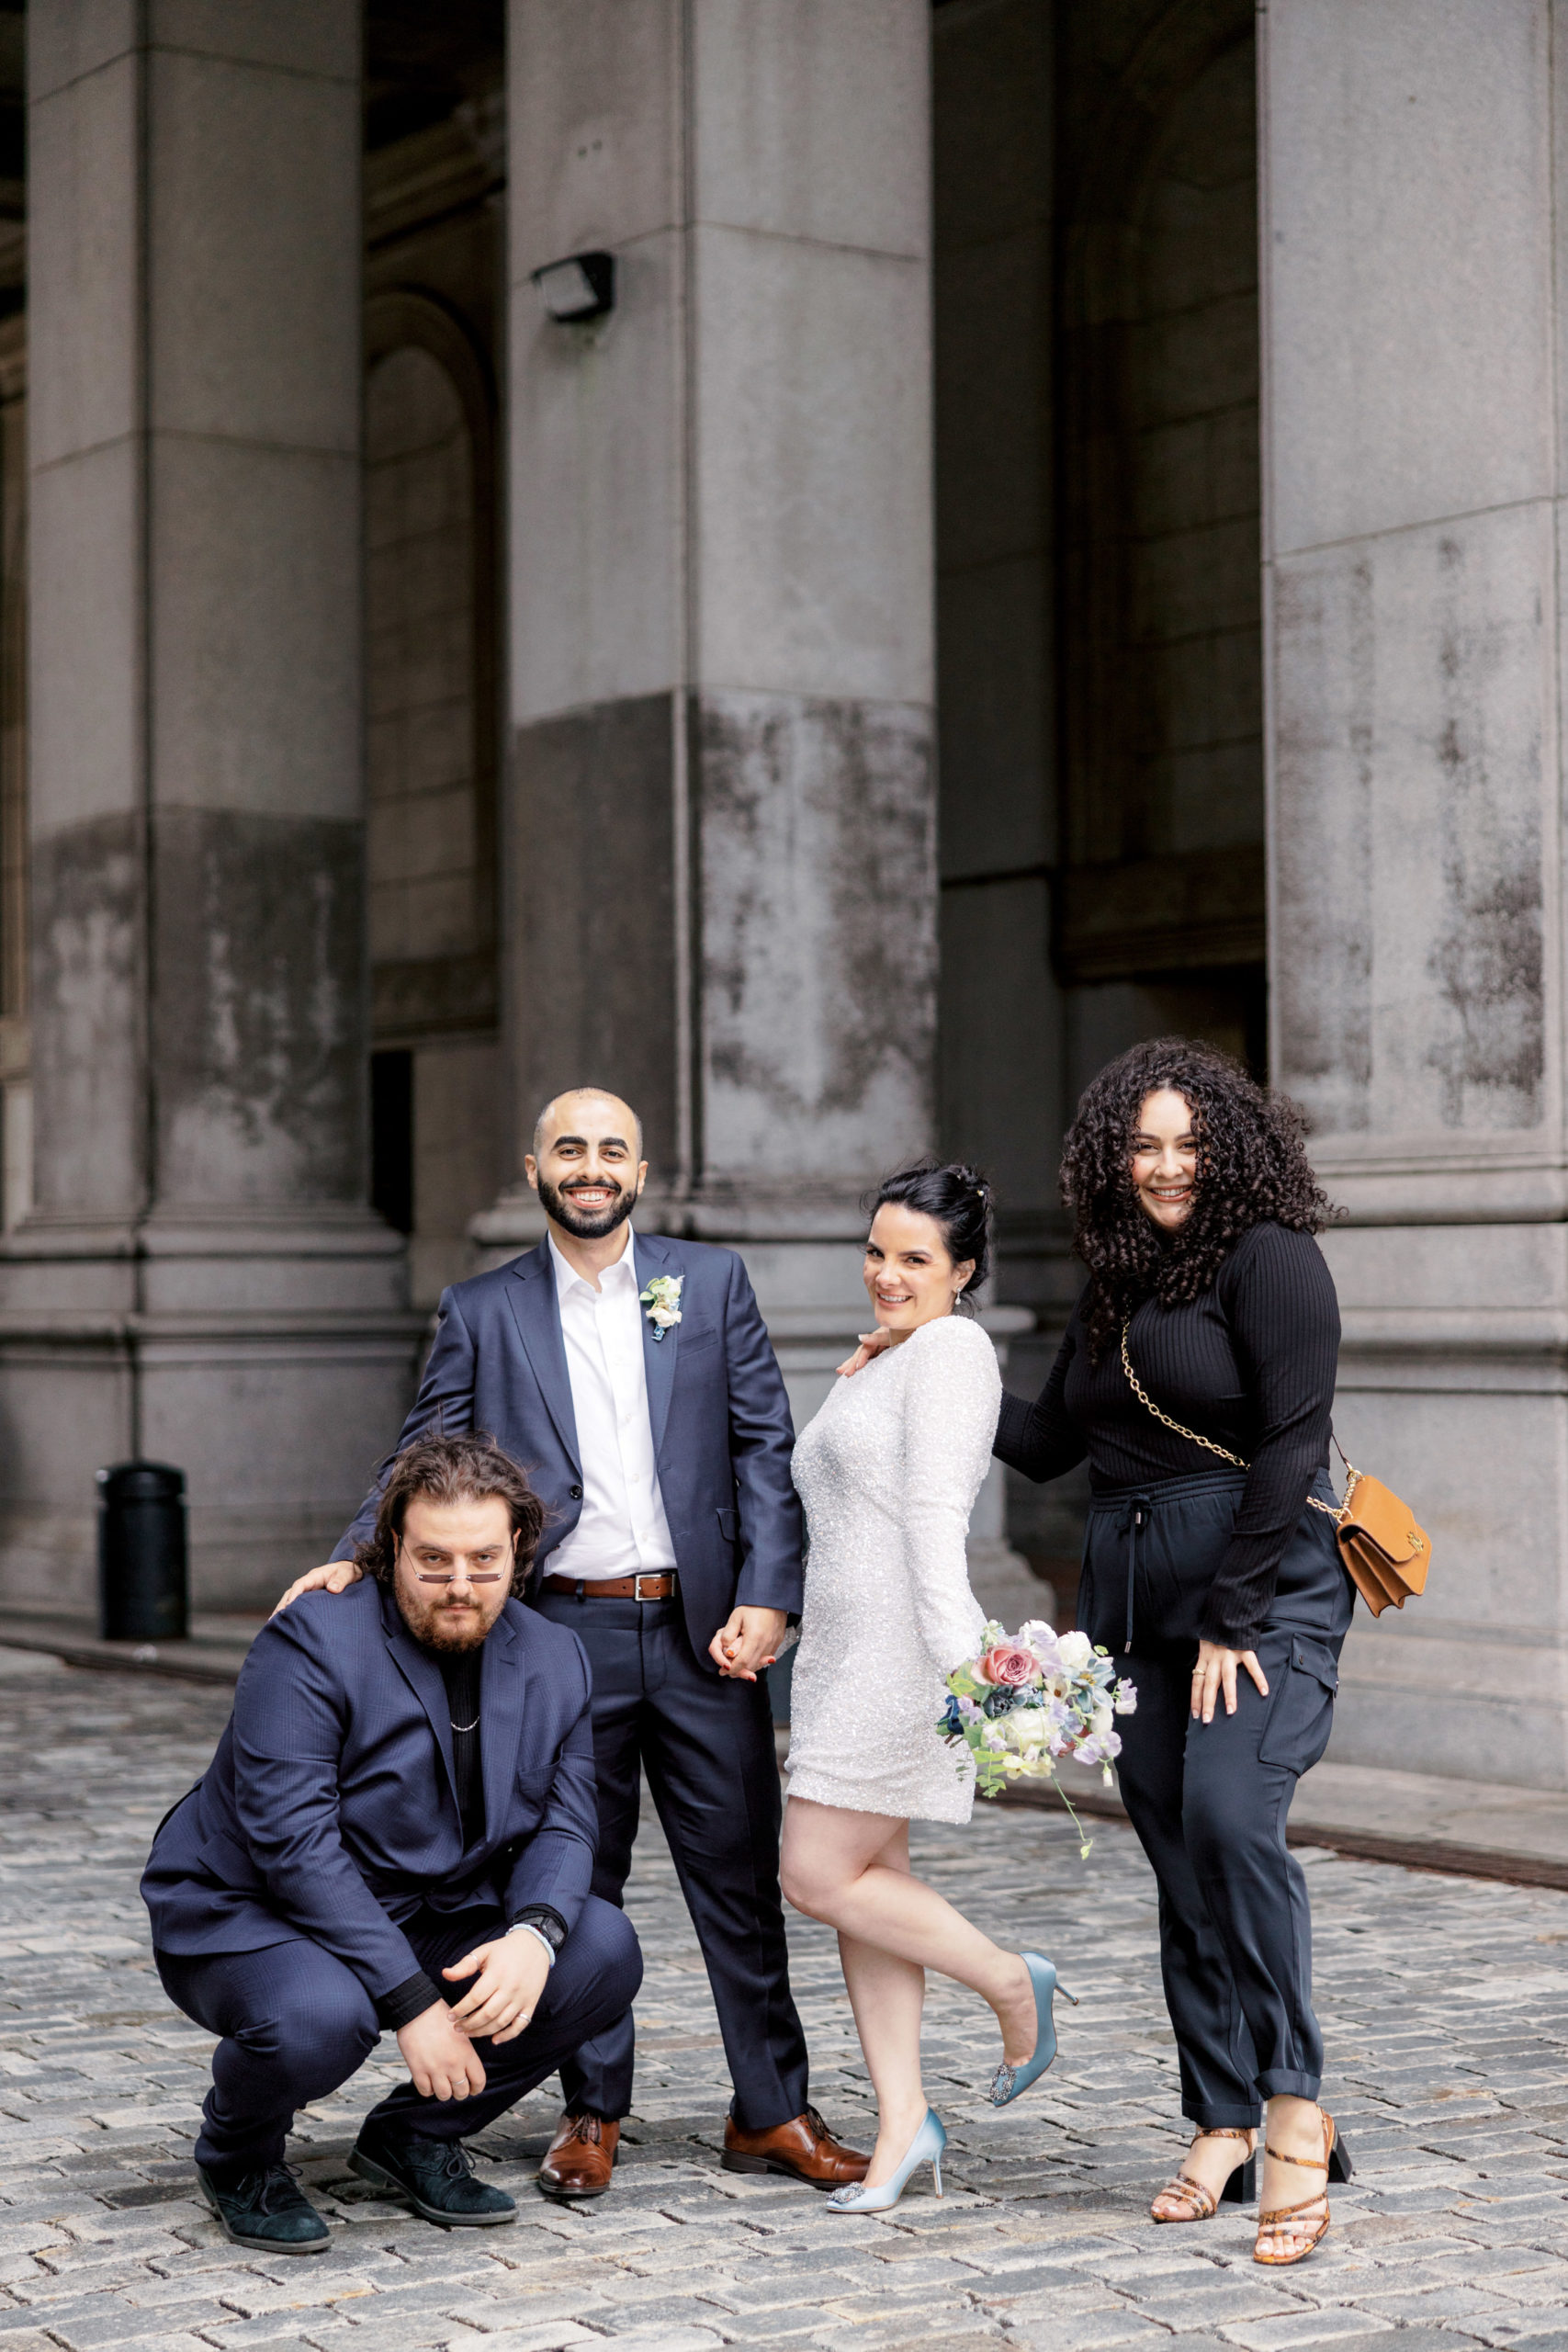 The bride and groom are happy with their two friends after their city hall elopement. Image by Jenny Fu Studio NYC